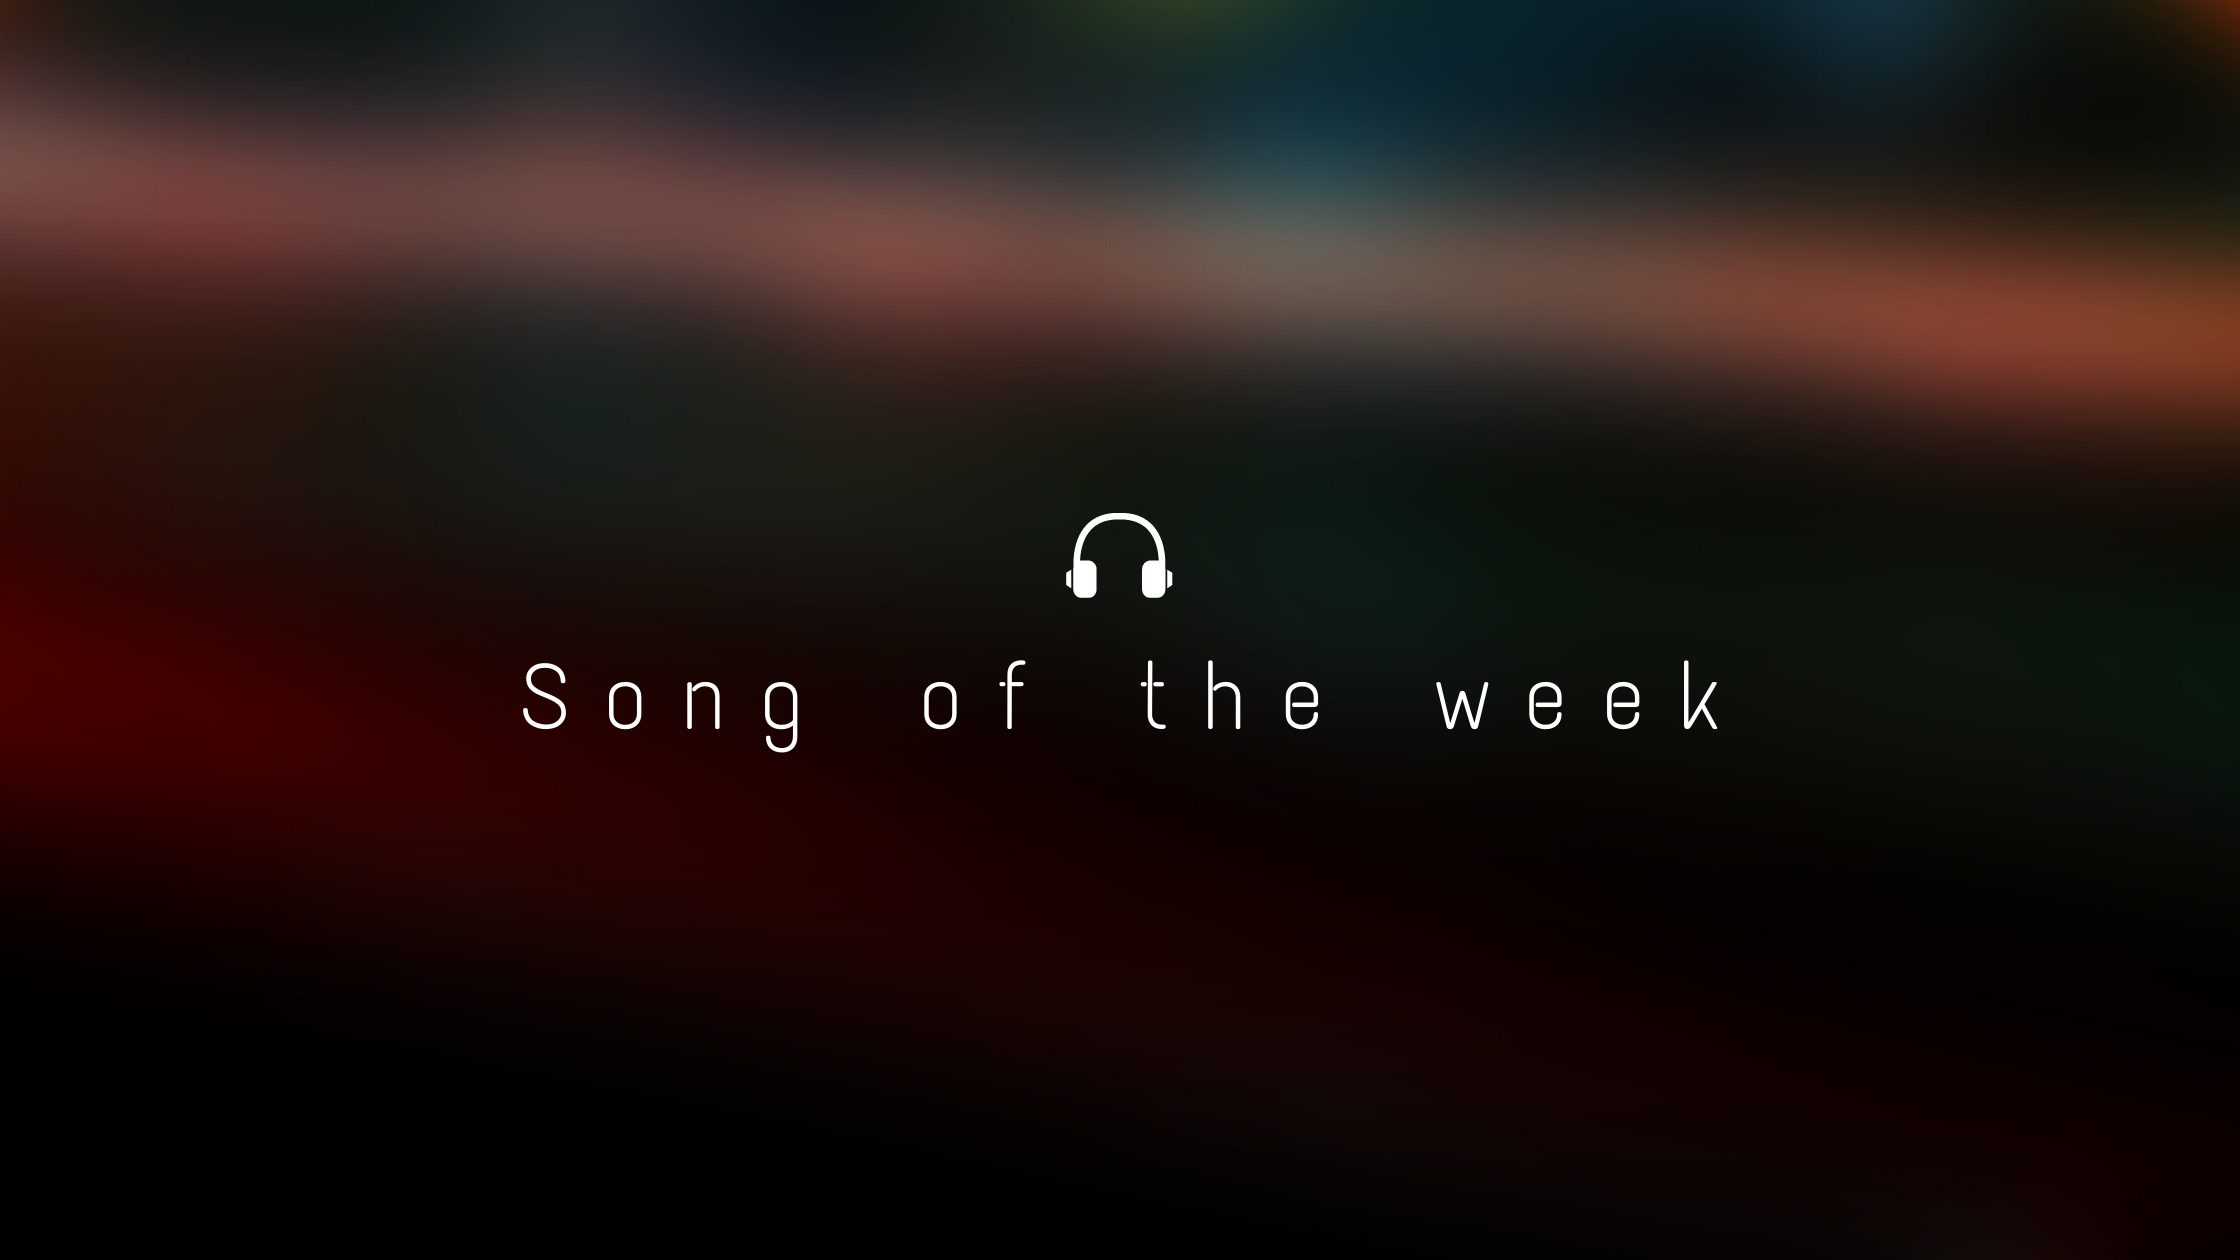 Song of the week – “In control”